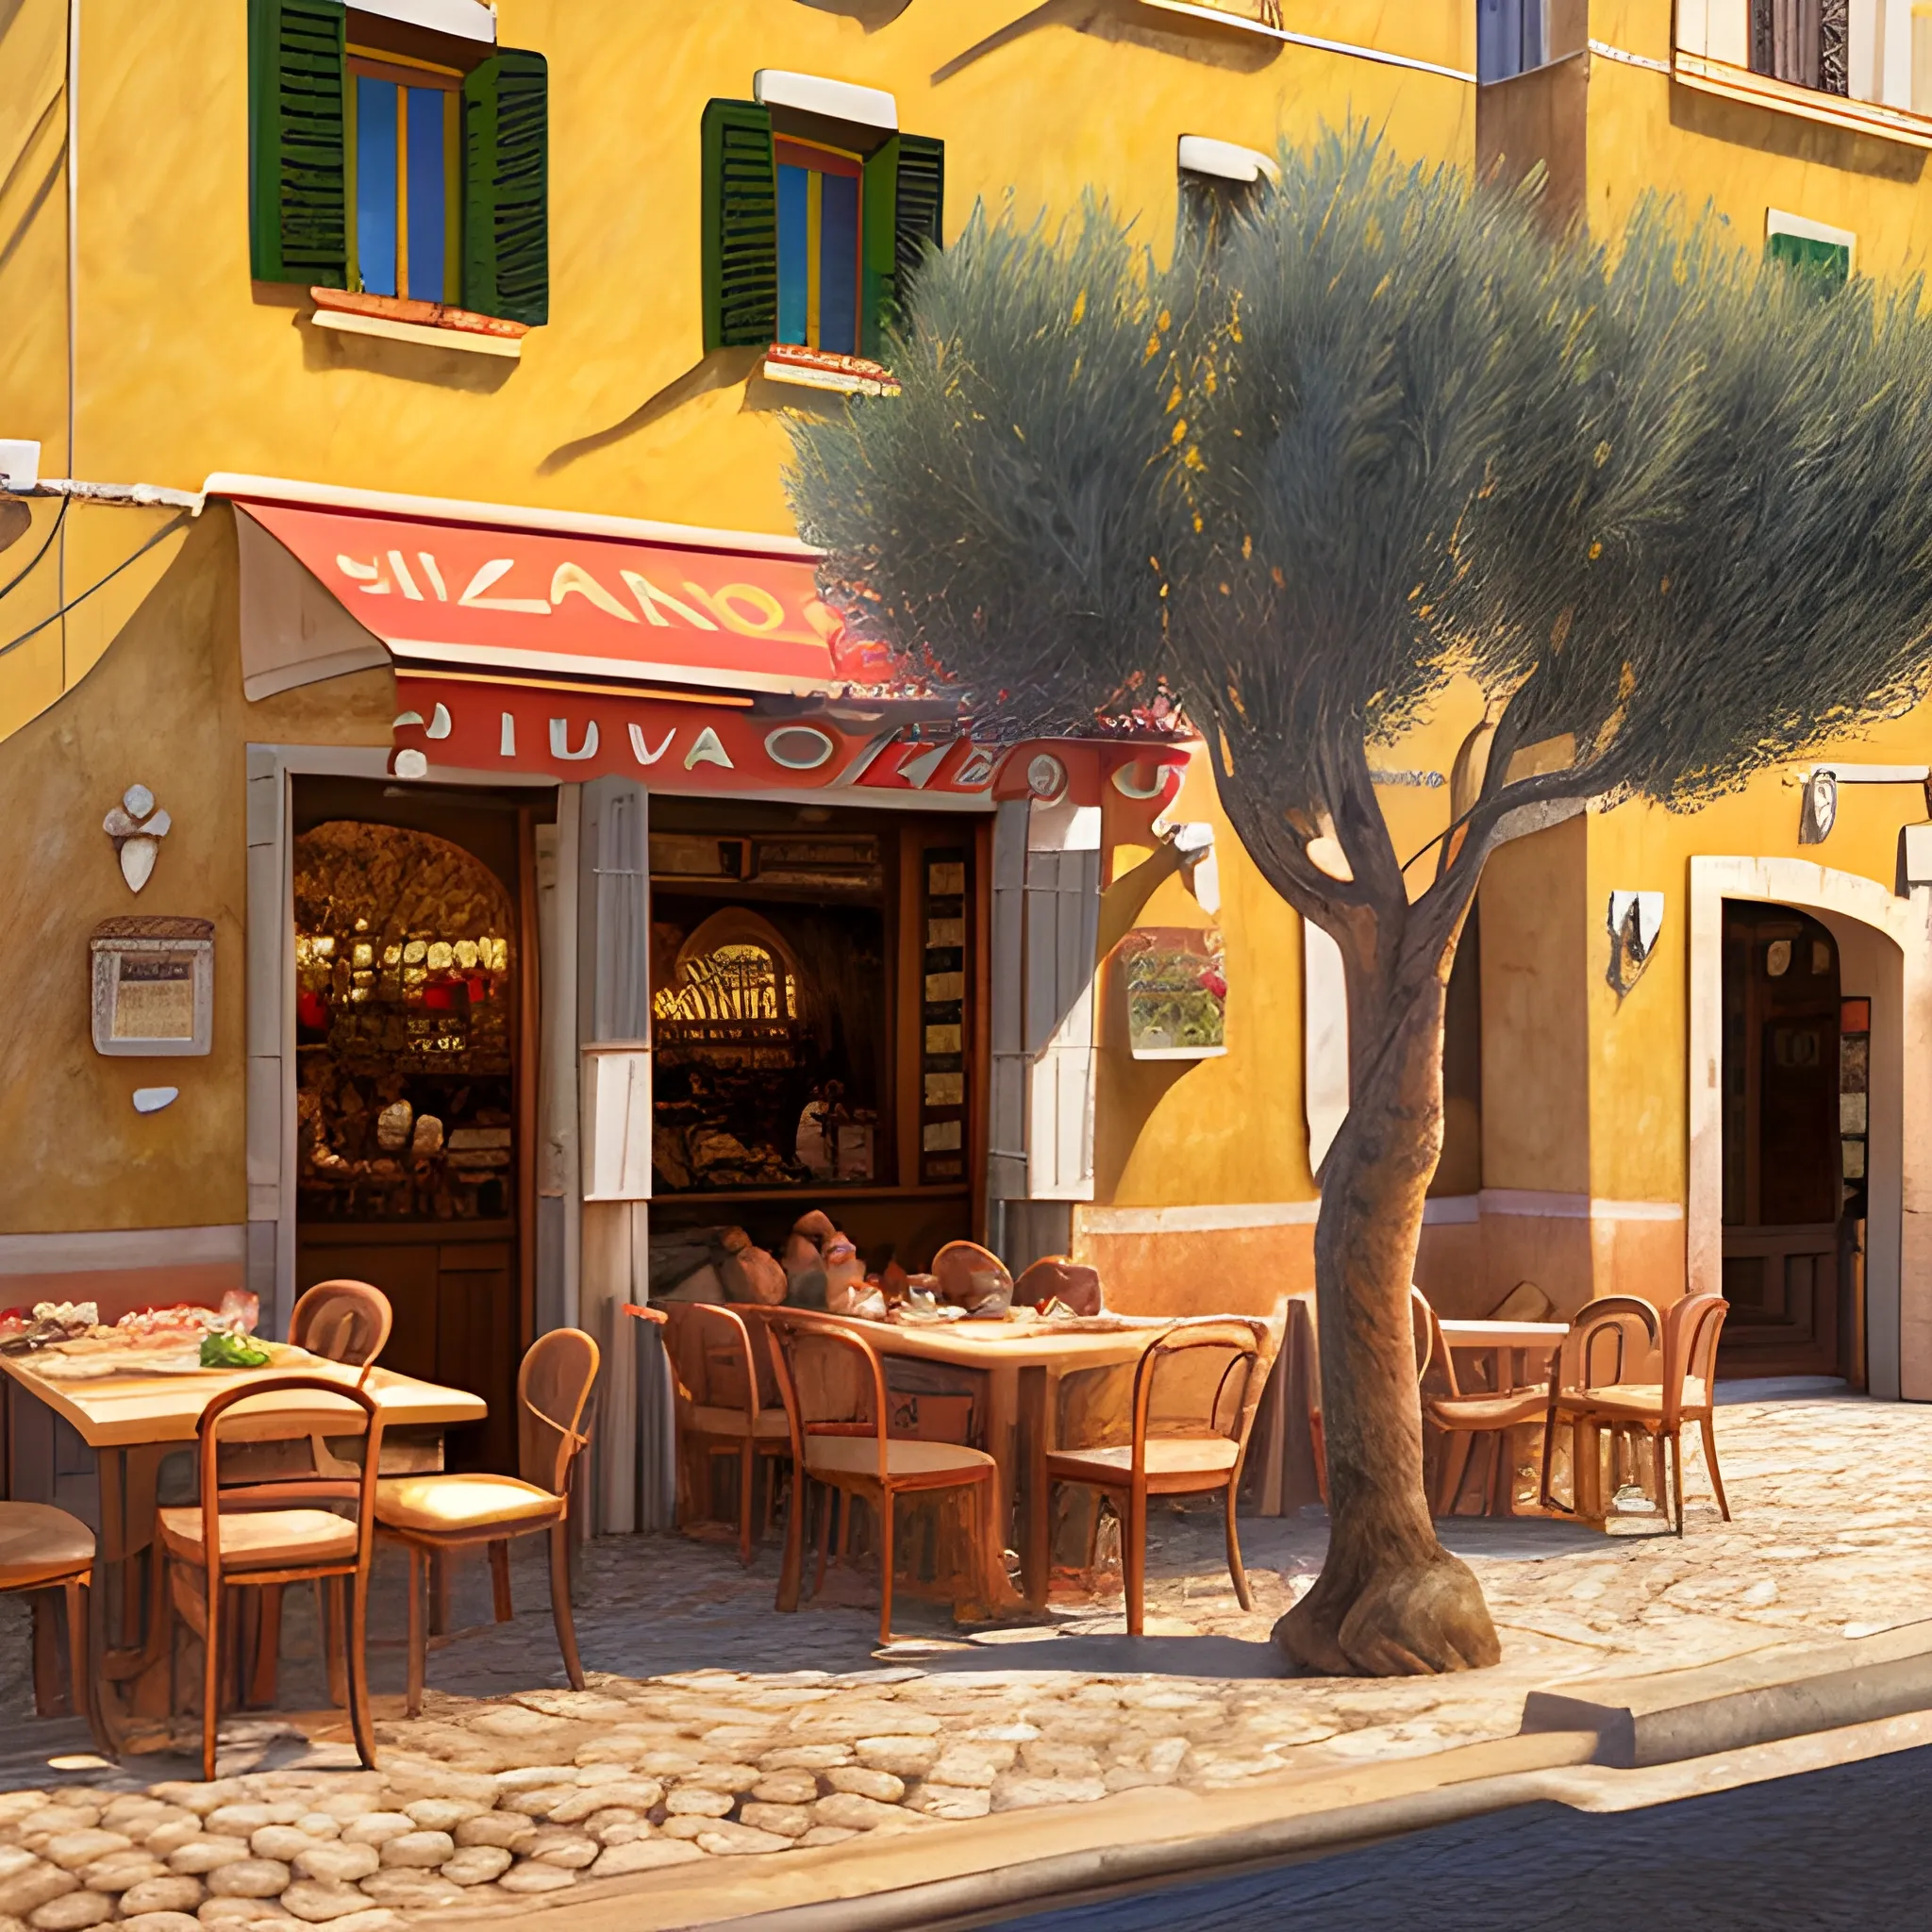 a traditional pizzeria in the street of a cuty building on the riviera. a terrace in the shade of a hundred - year - old olive tree, a friendly atmosphere around pizzas and rose wine. dolce vita. unreal engine rendering, hyper realist, ultra detailed, oil painting, warm colors, happy, impressionism, da vinci, 